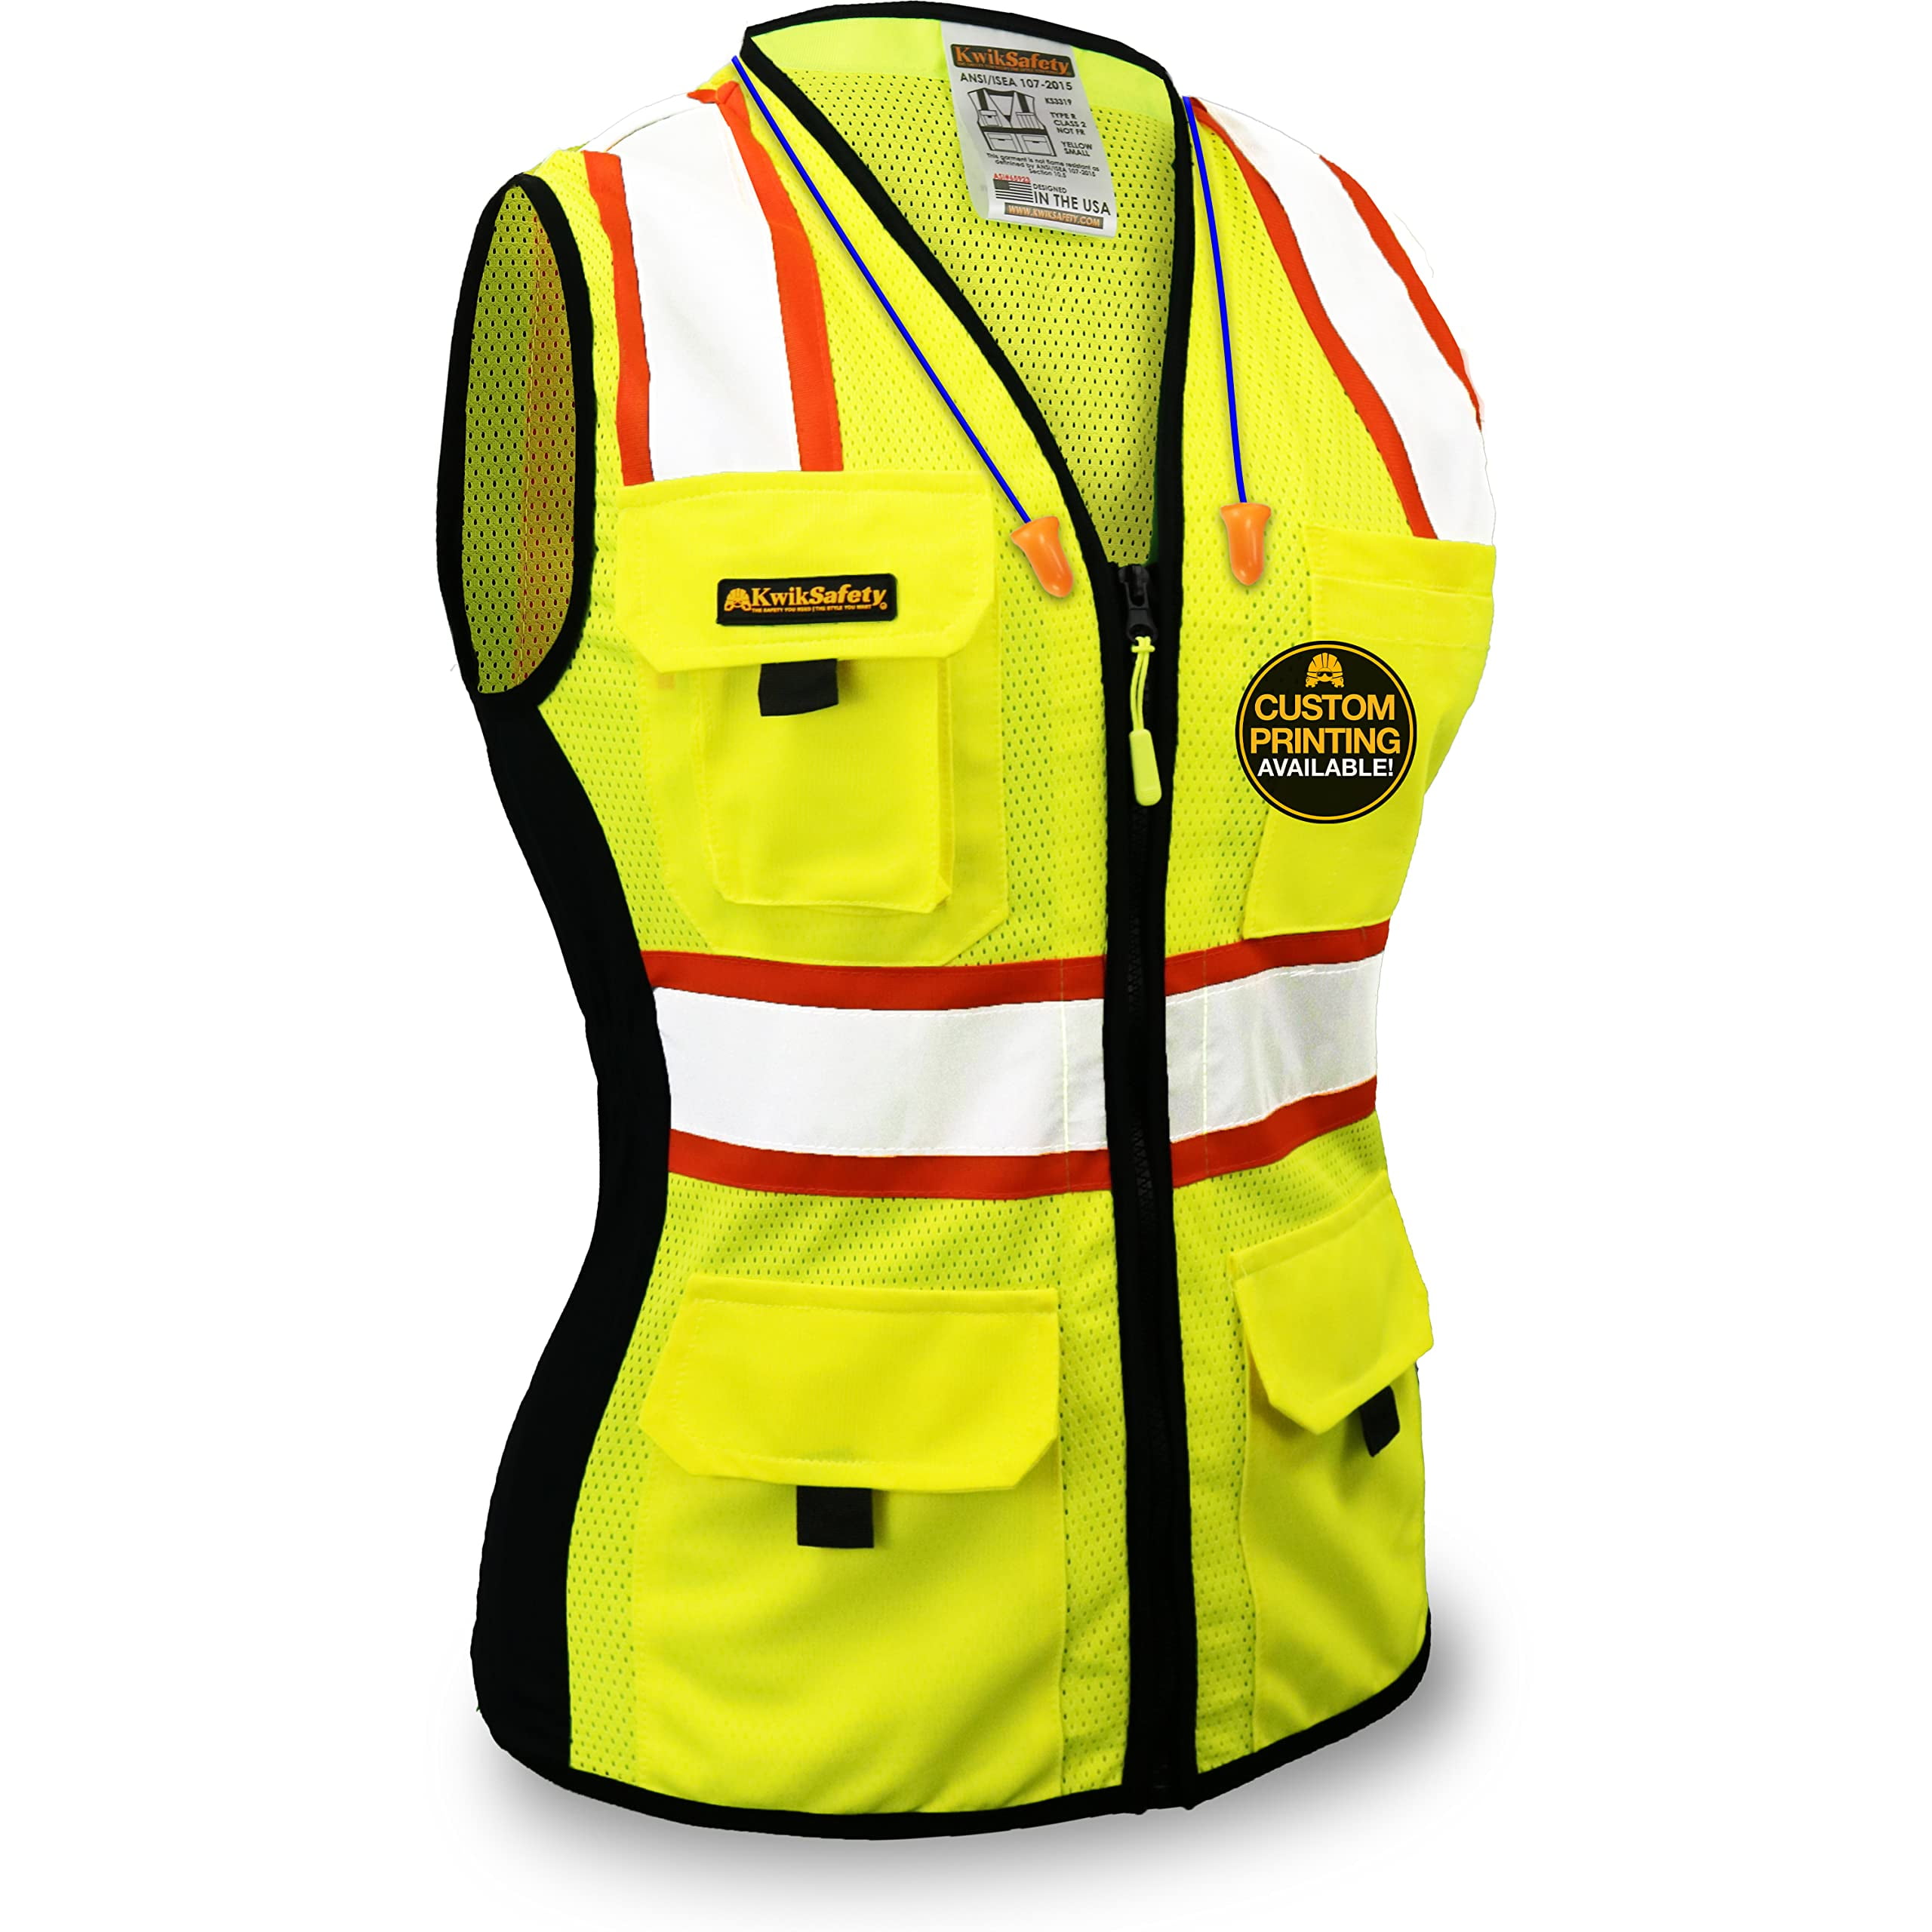 AWLYLNLL High Visibility Safety Vest for Men Women, Construction Vest with  Reflective Strips and Zipper Front, Neon Yellow, X-Large